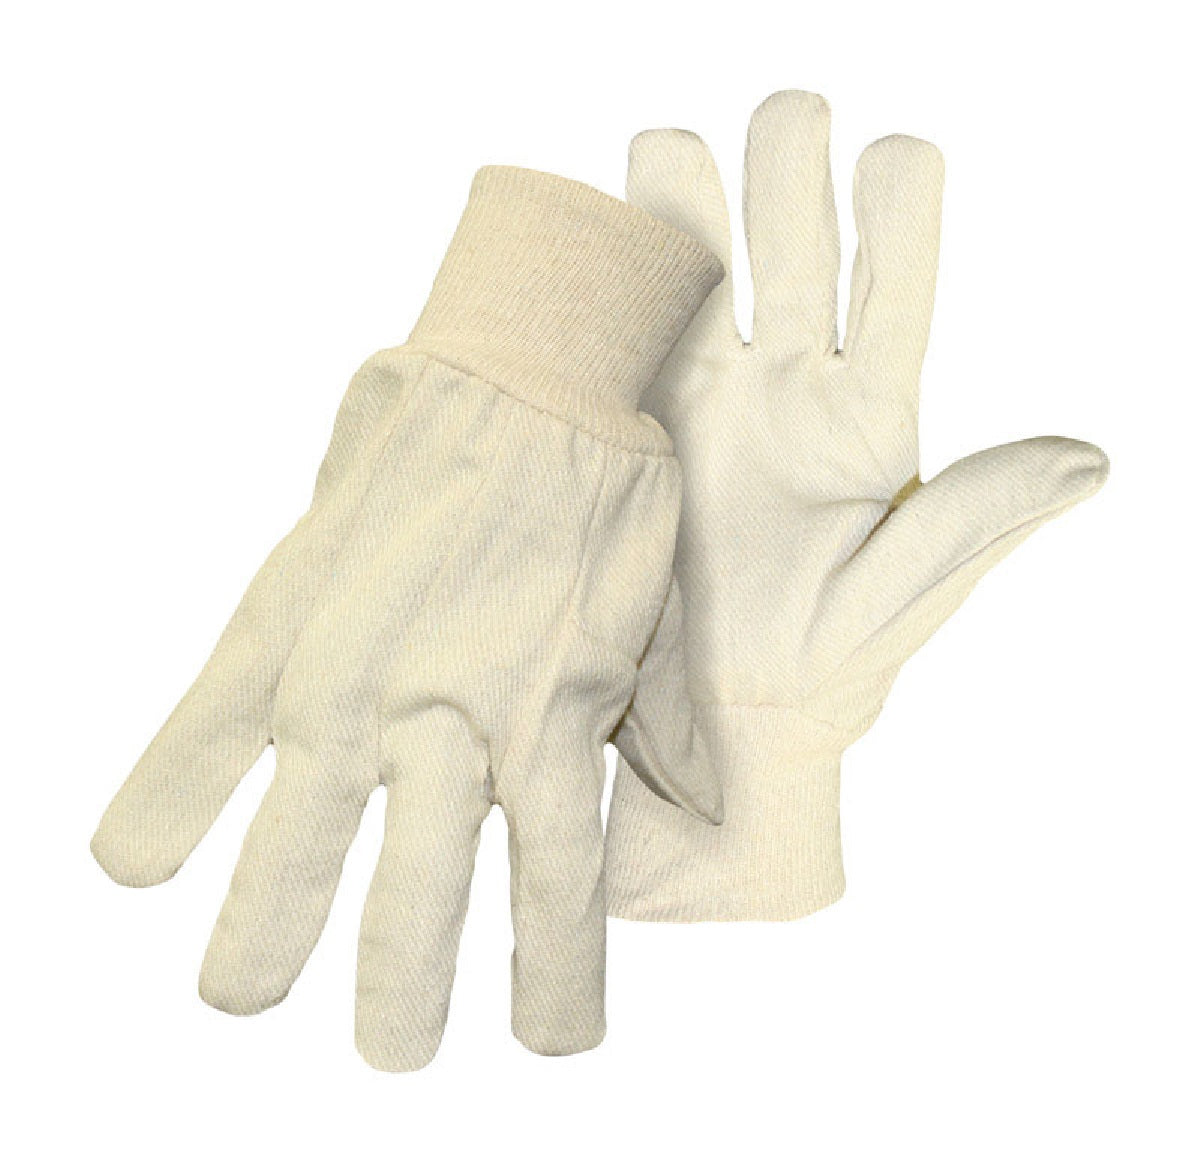 buy gloves at cheap rate in bulk. wholesale & retail bulk personal care goods store.